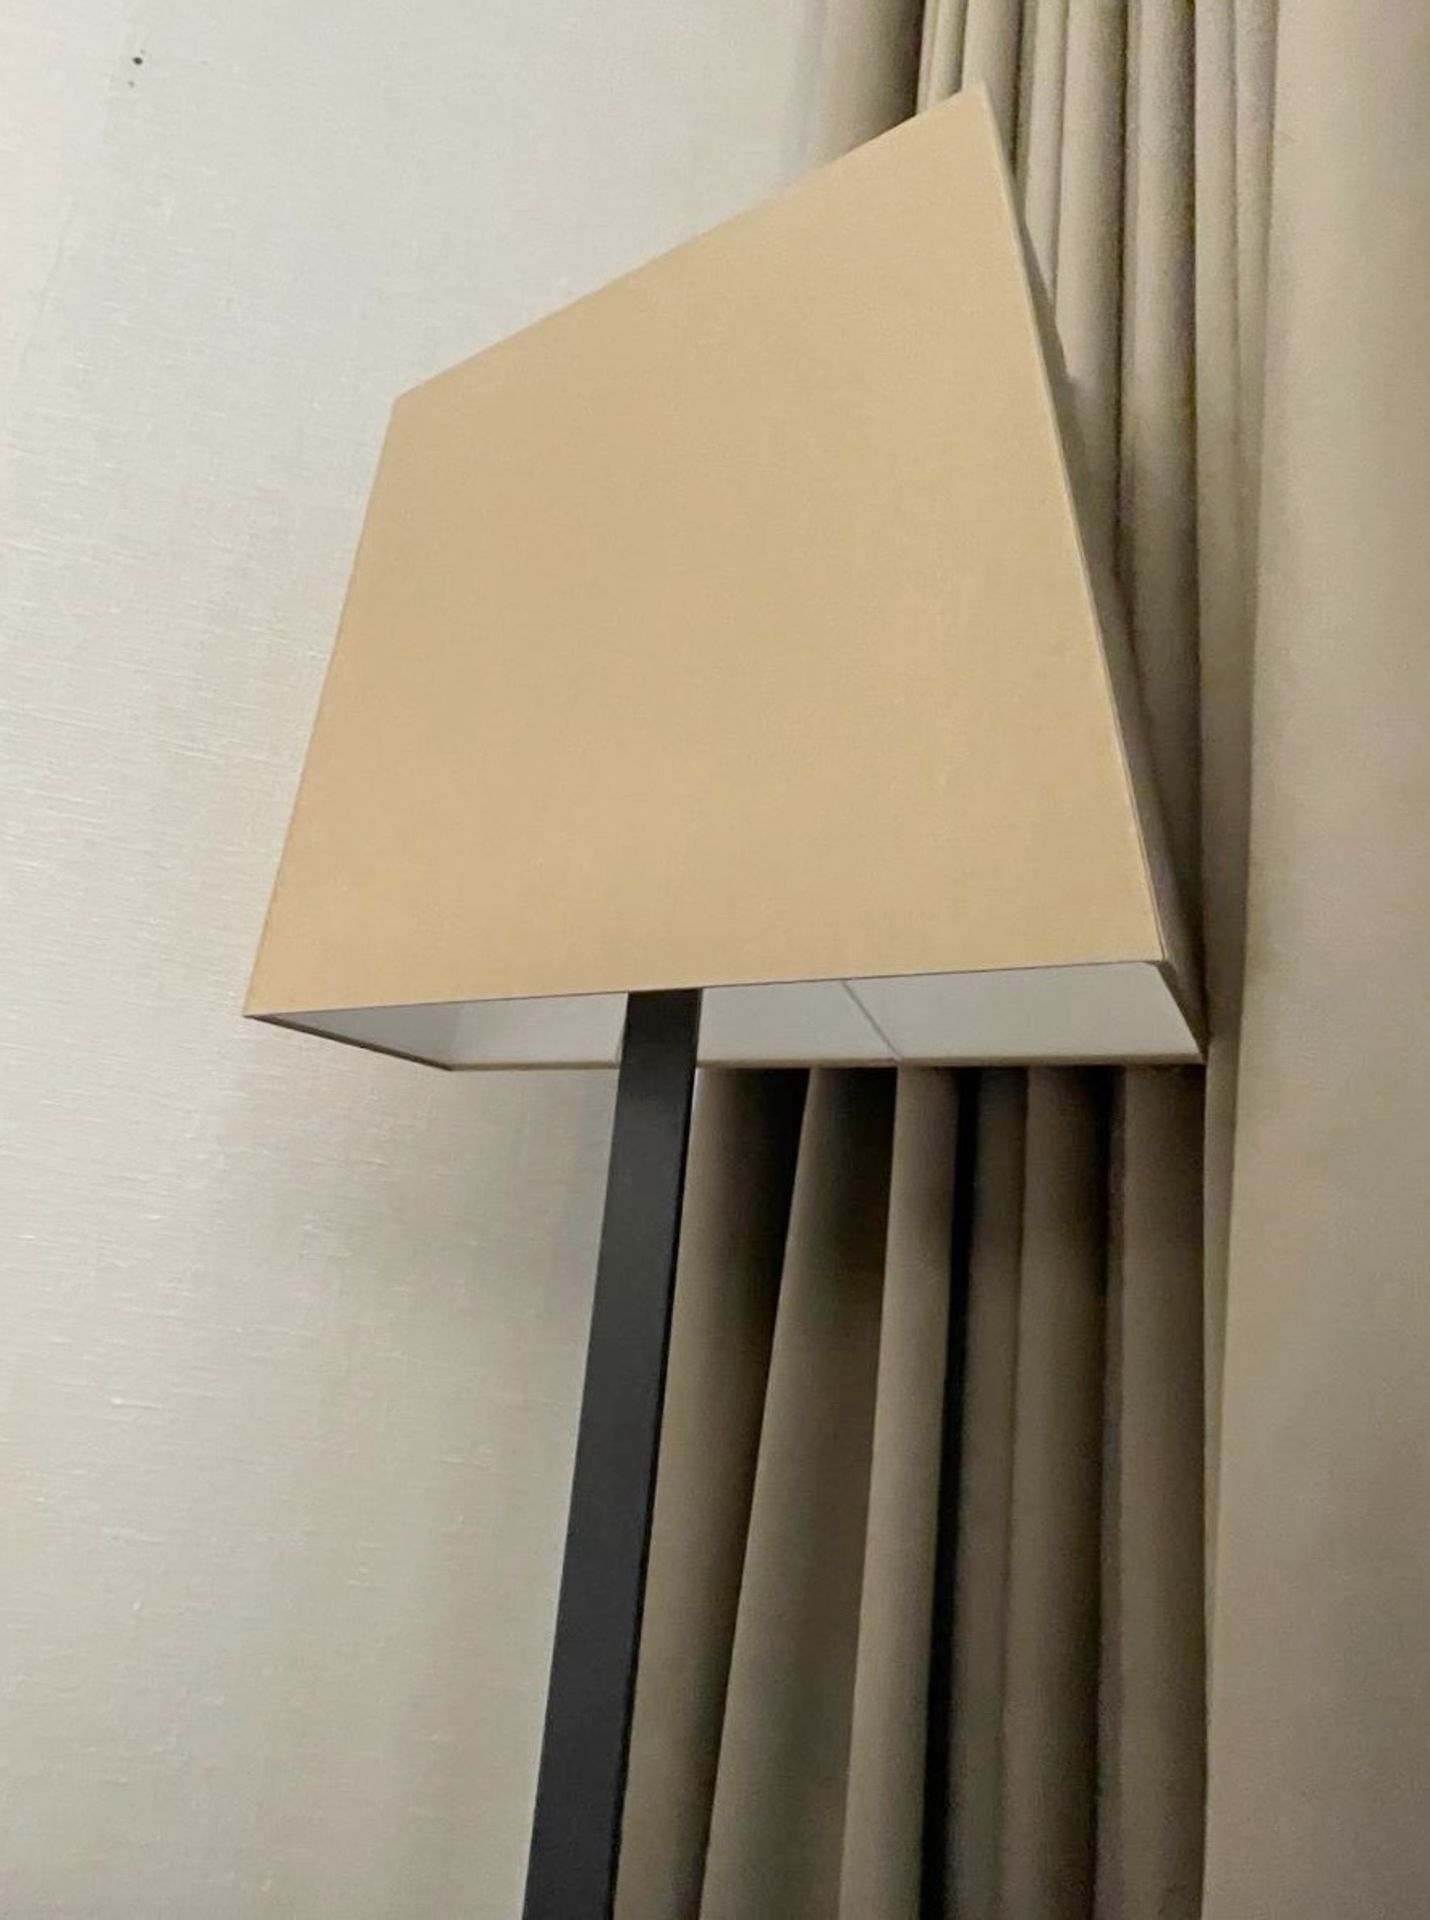 A Pair of Slender Profile Floor Lamps with Modern Angular Shades and Bronzed Finish - Image 2 of 11